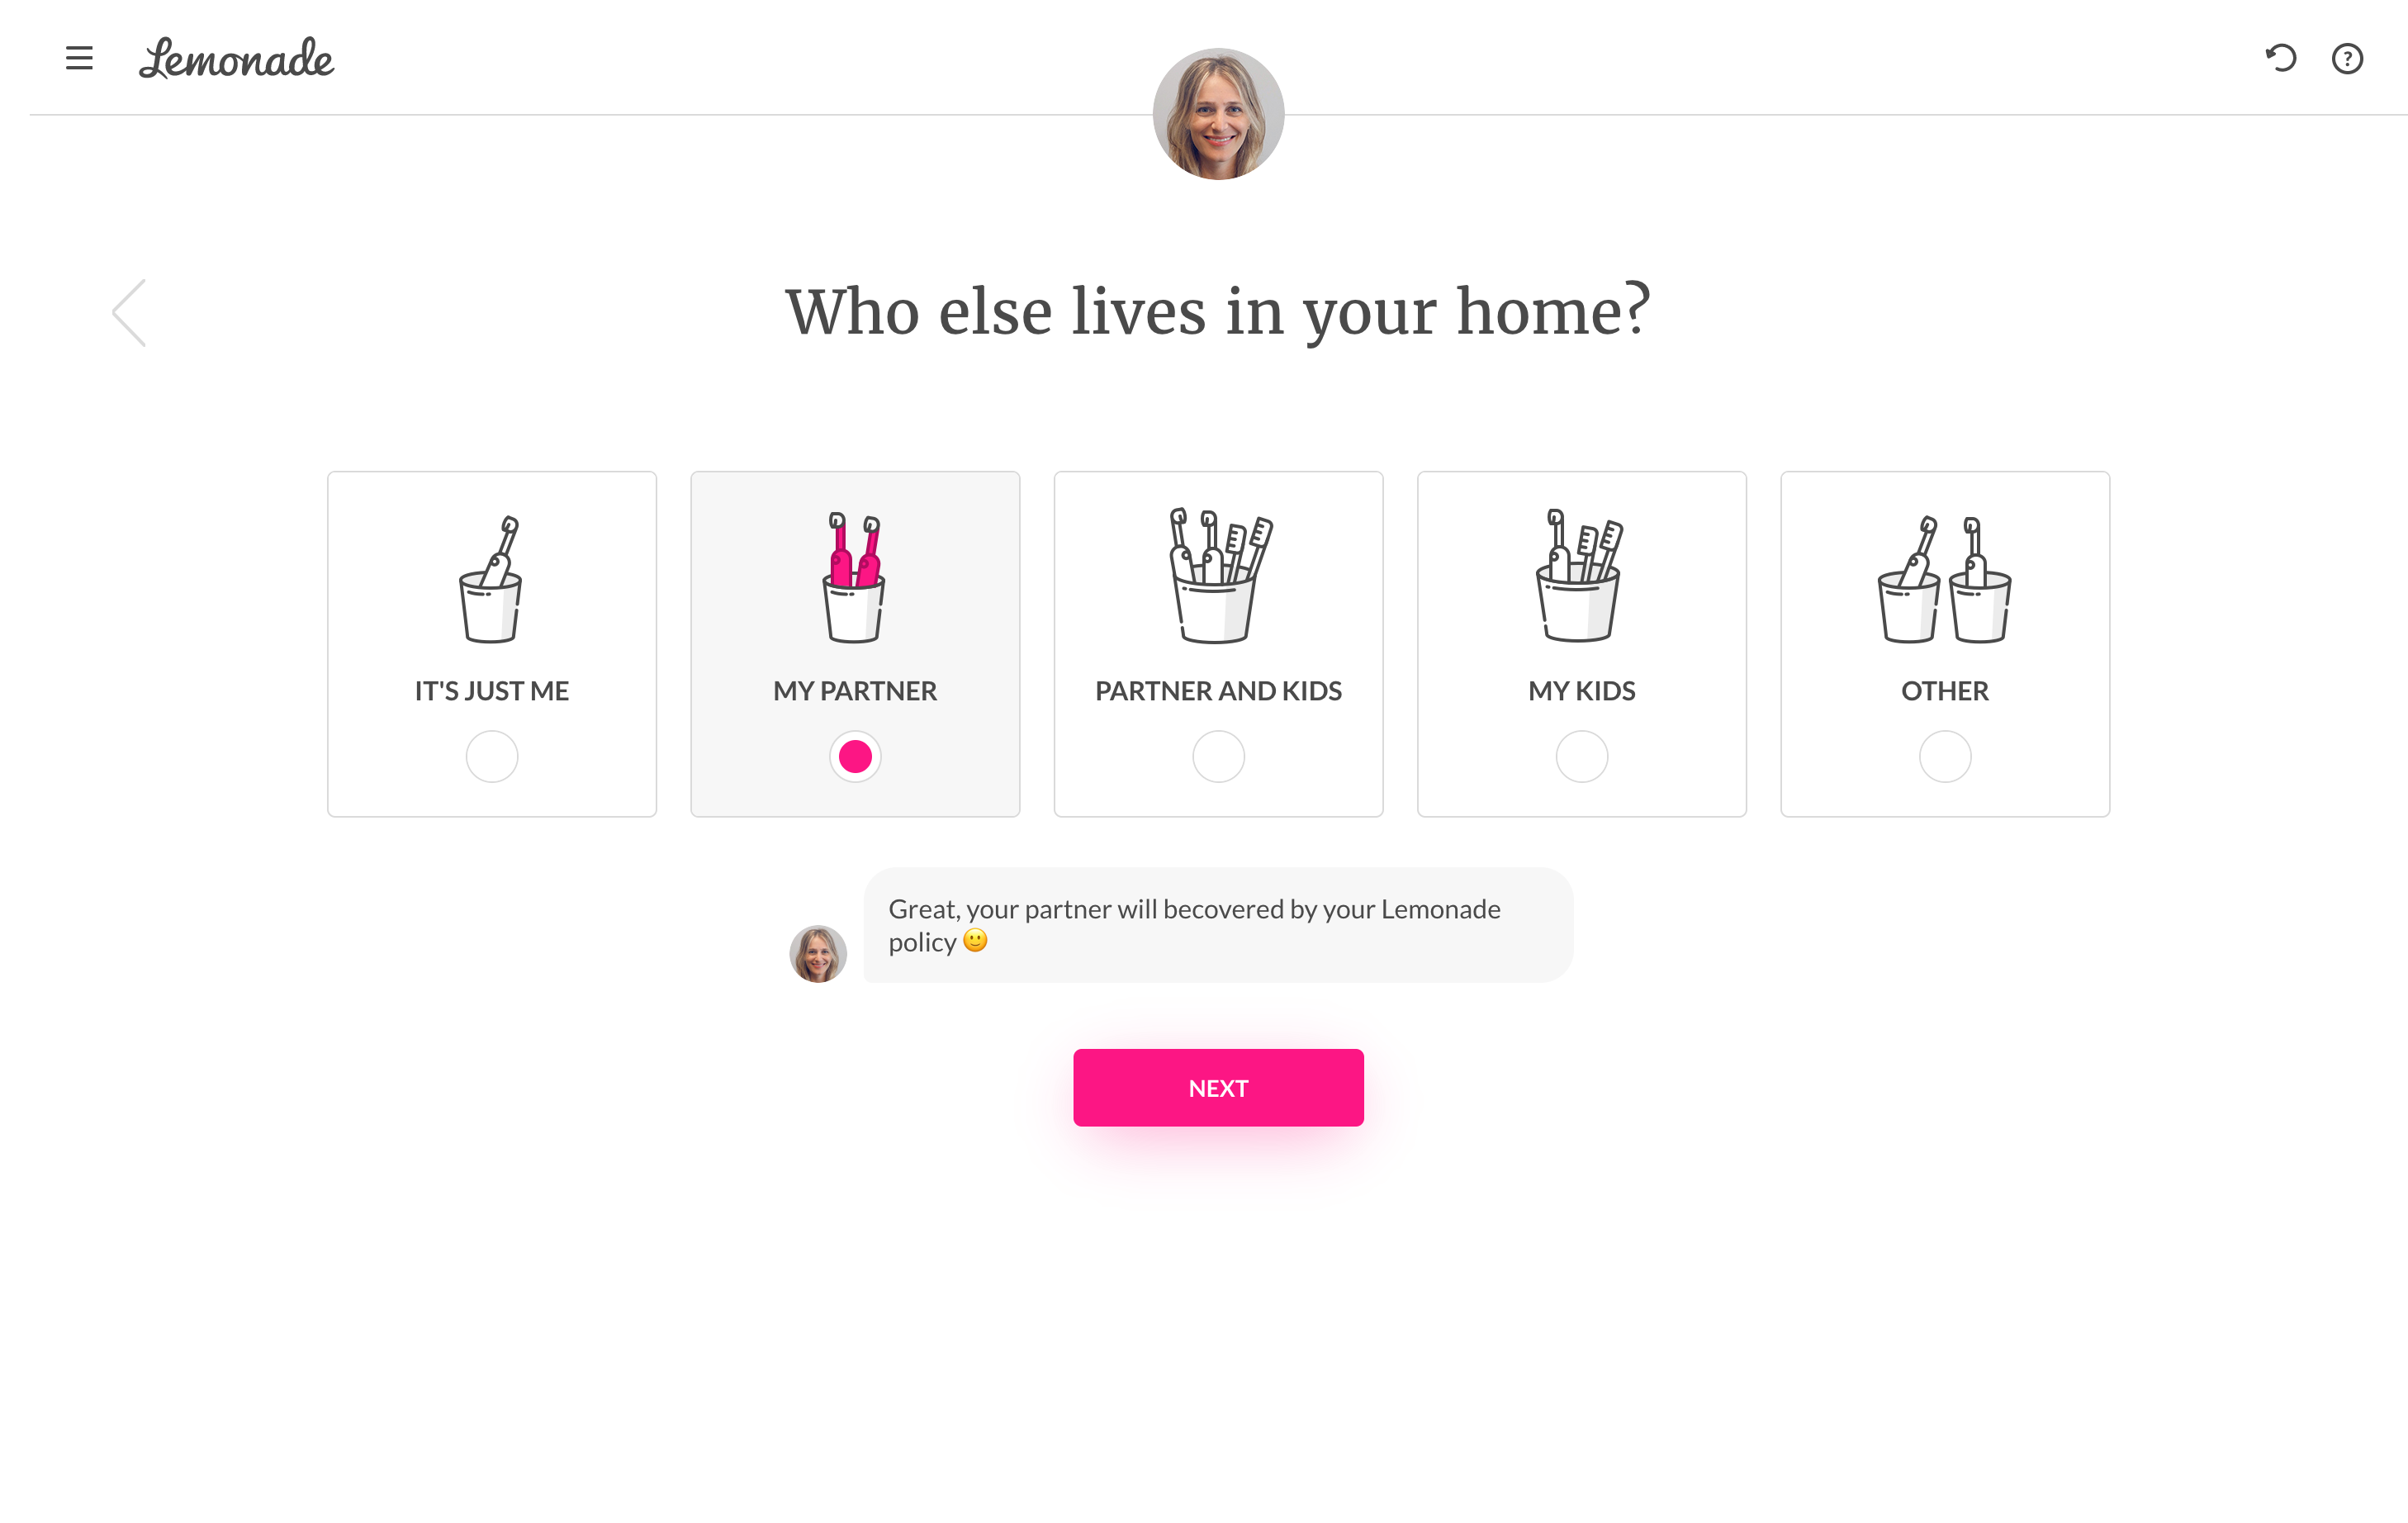 Insurance company Lemonade uses toothbrushes to represent users and their families during sign-up.